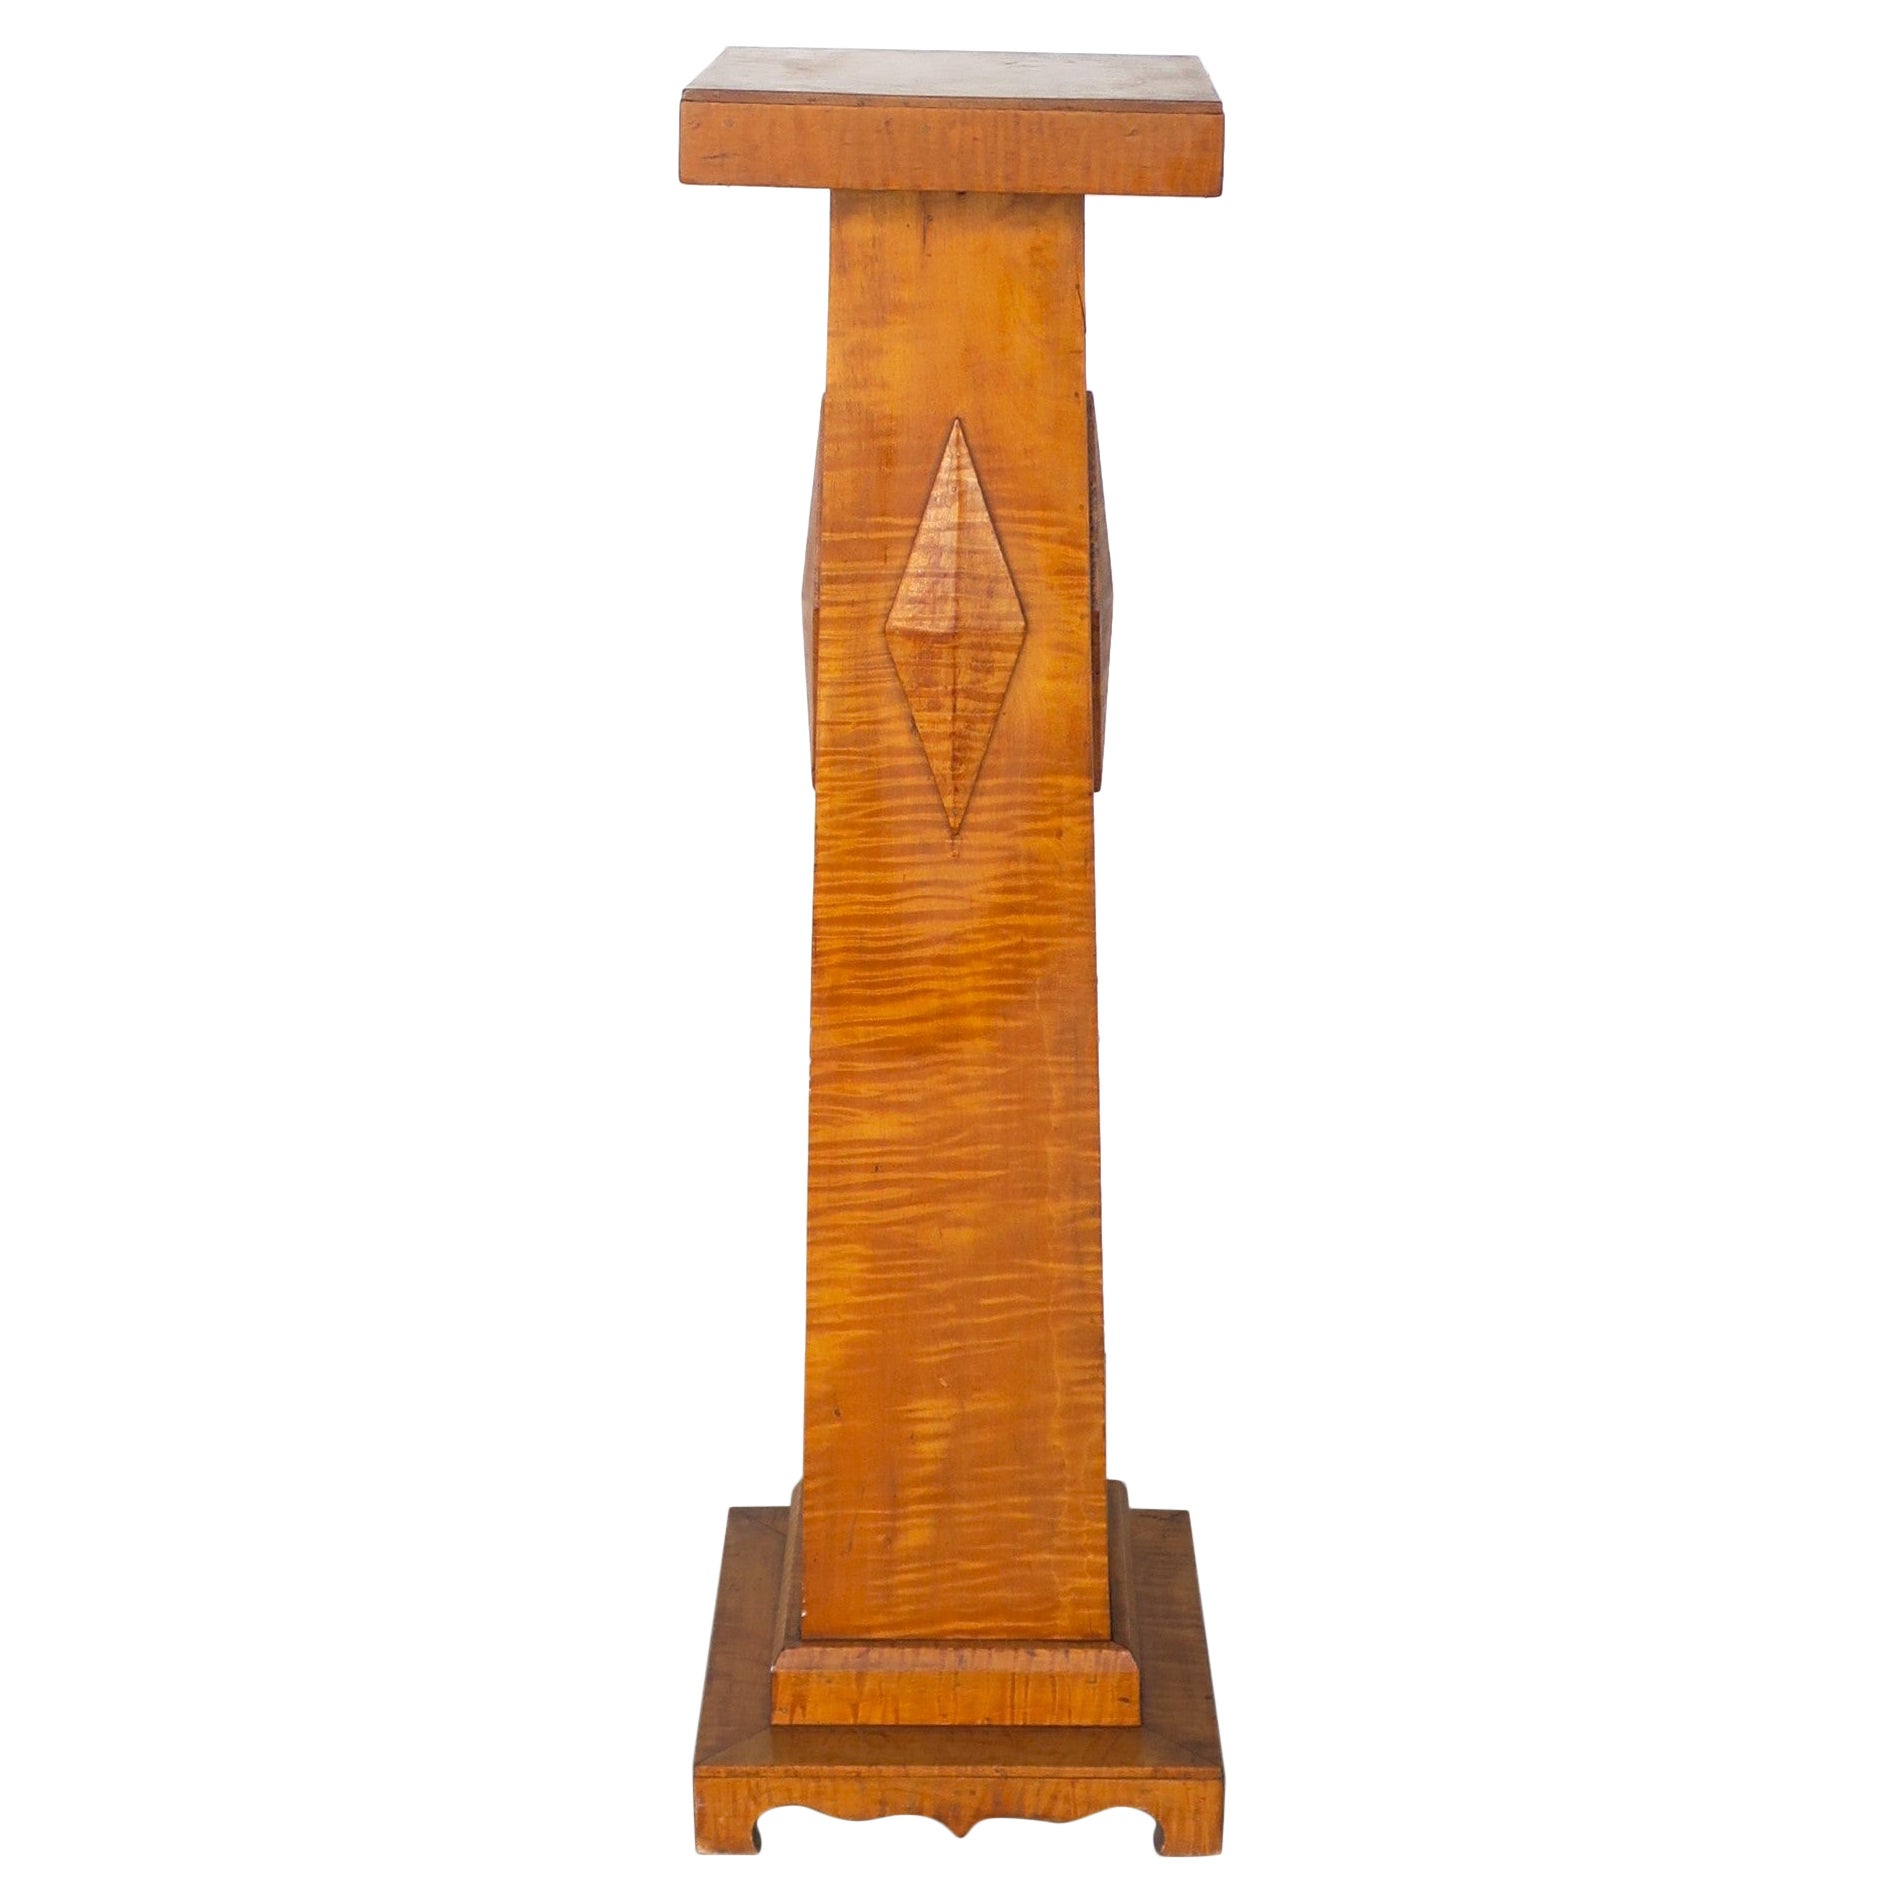 English Wood Column Pedestal Stand For Sale